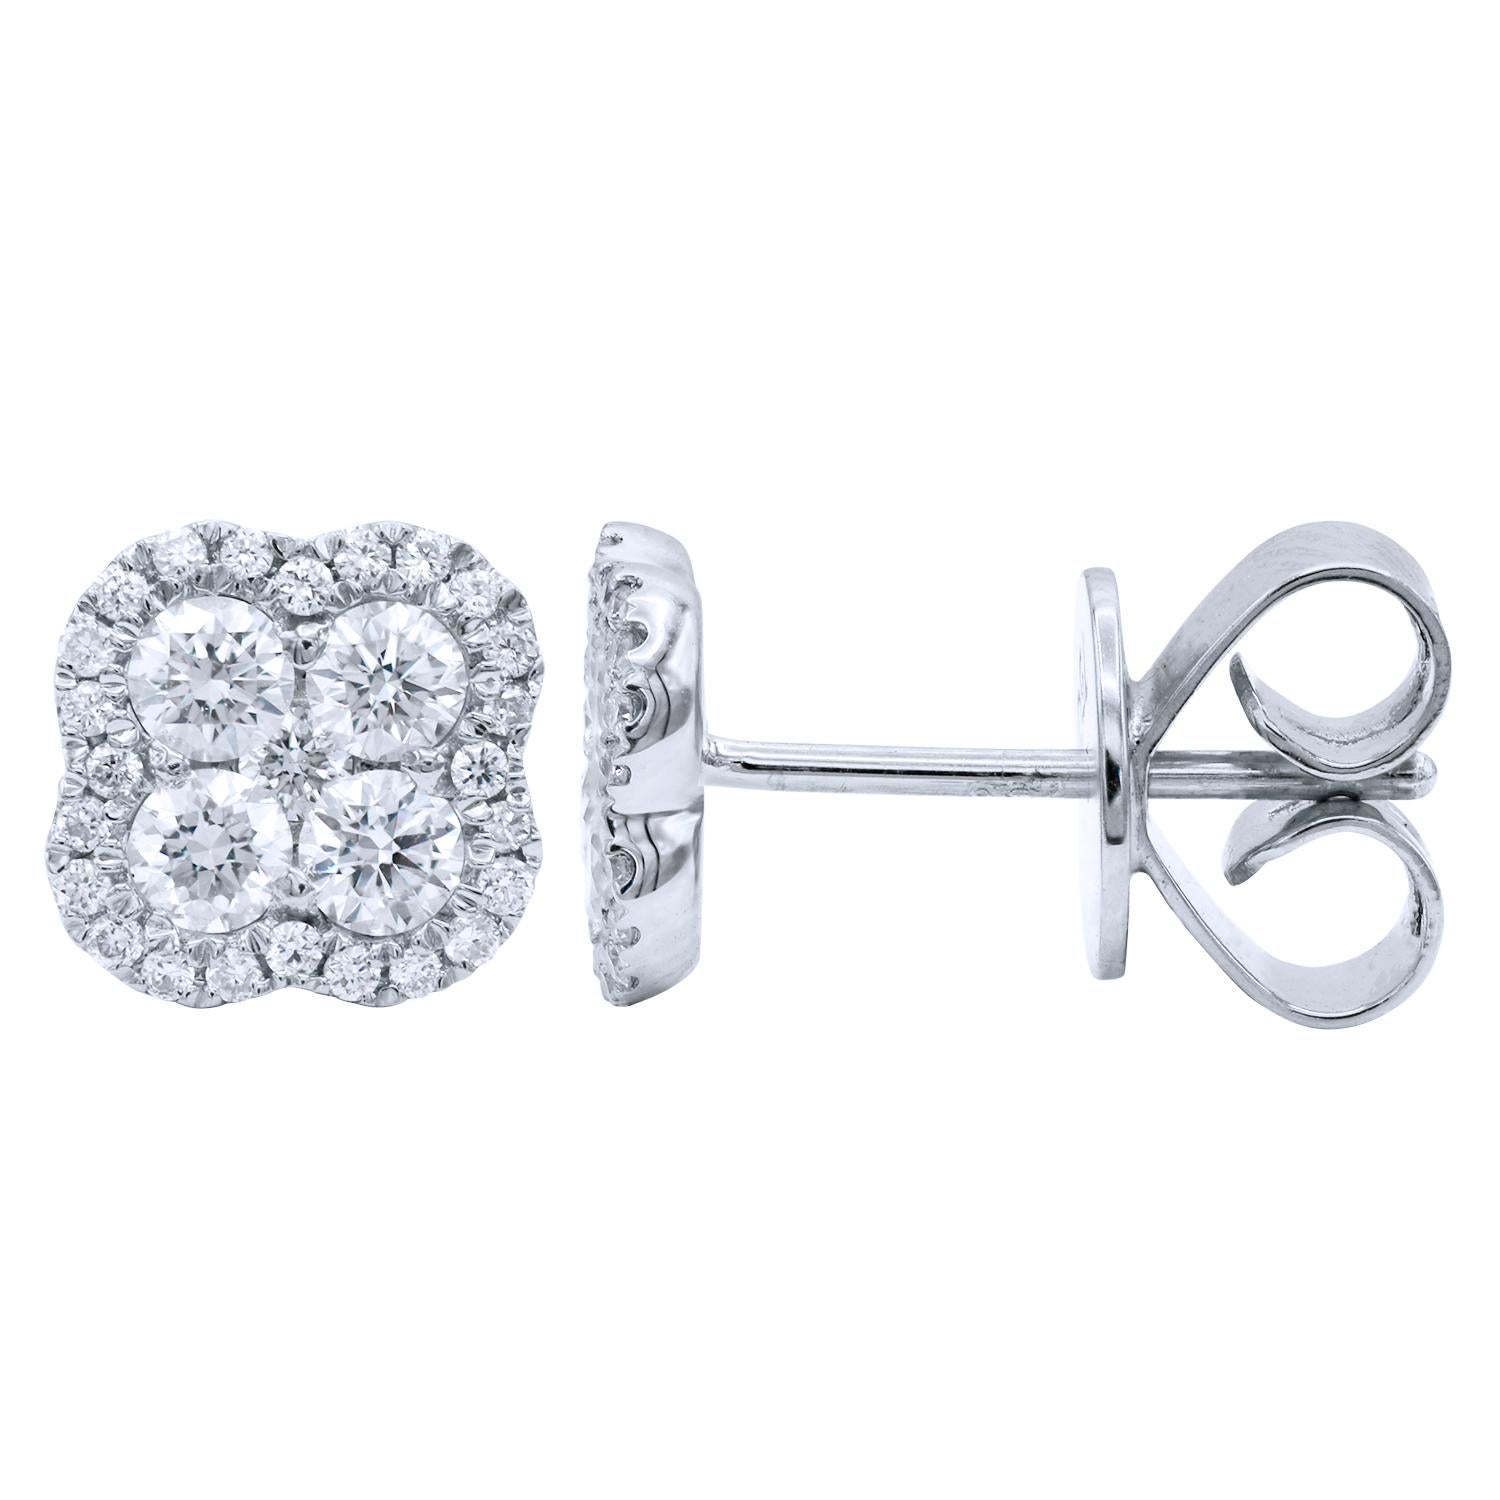 These beautiful earrings sparkle and shine with 58 round VS2, G color diamonds totaling 0.46 carats. They contain 4 larger diamonds surrounded by smaller diamonds to create a beautiful cluster. They are set in 1.8 grams of 18 karat white gold with a